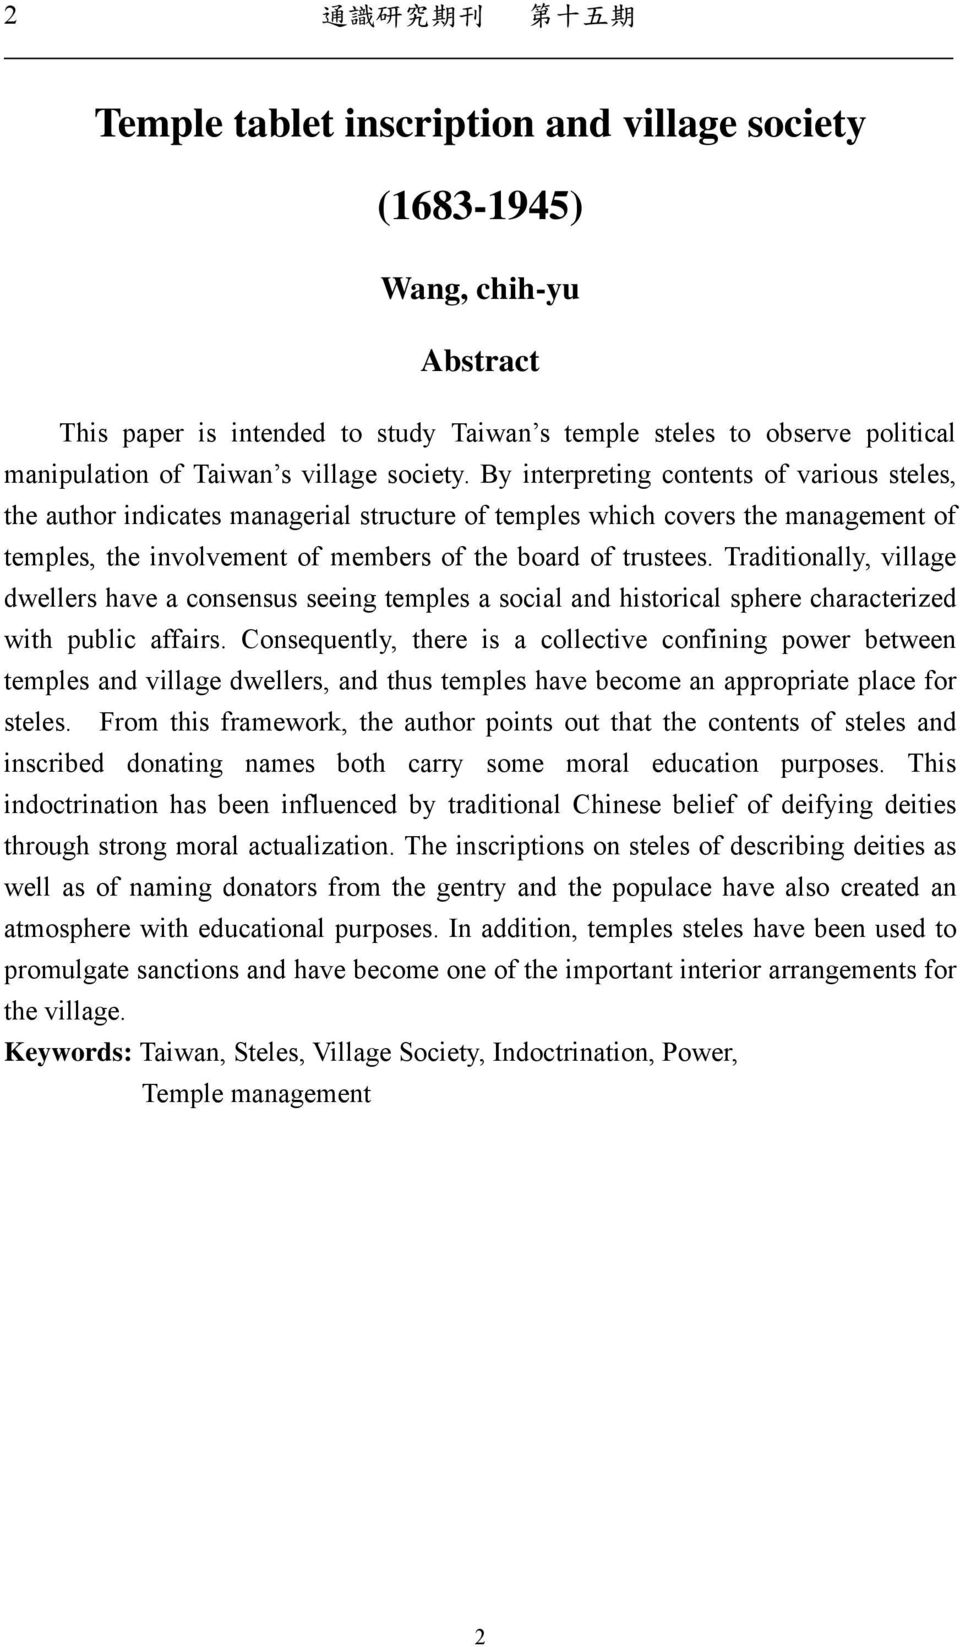 By interpreting contents of various steles, the author indicates managerial structure of temples which covers the management of temples, the involvement of members of the board of trustees.